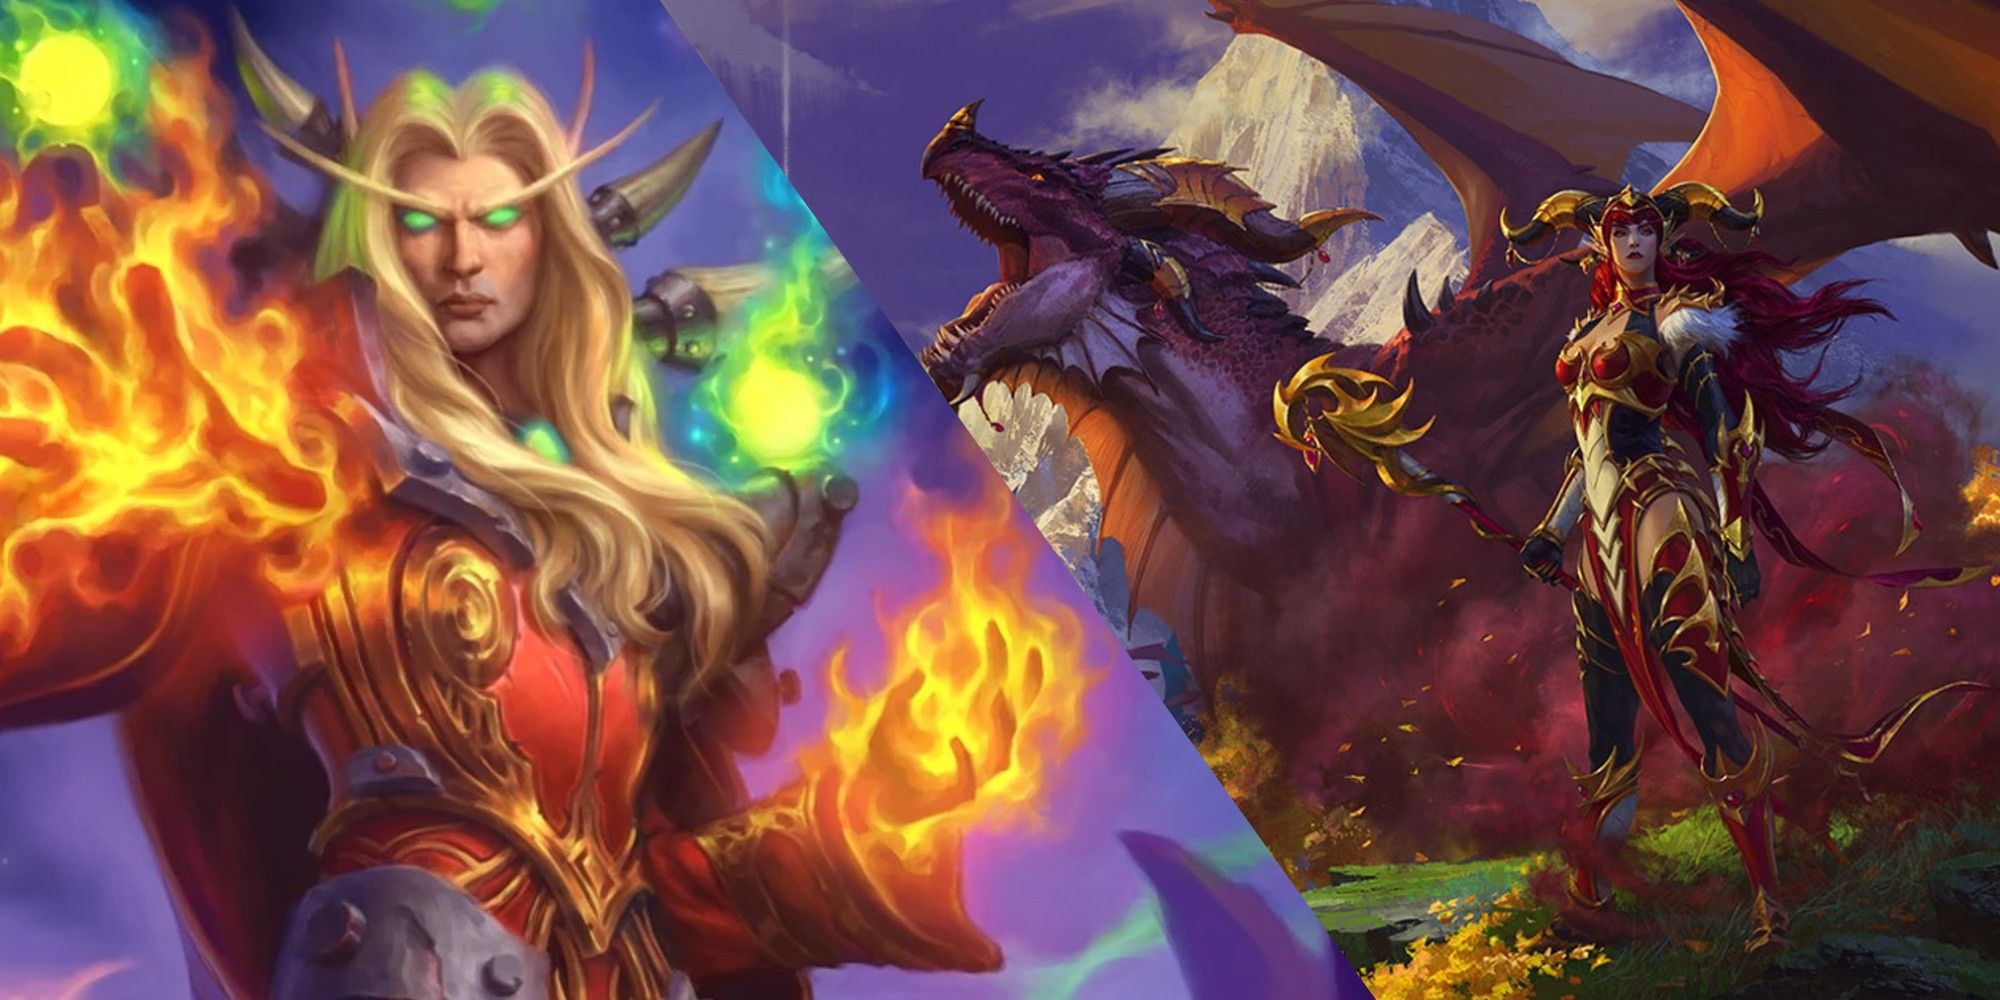 Official art of Kael'thas Sunstrider and Alexstrasza of the Red Dragonflight from World of Warcraft.